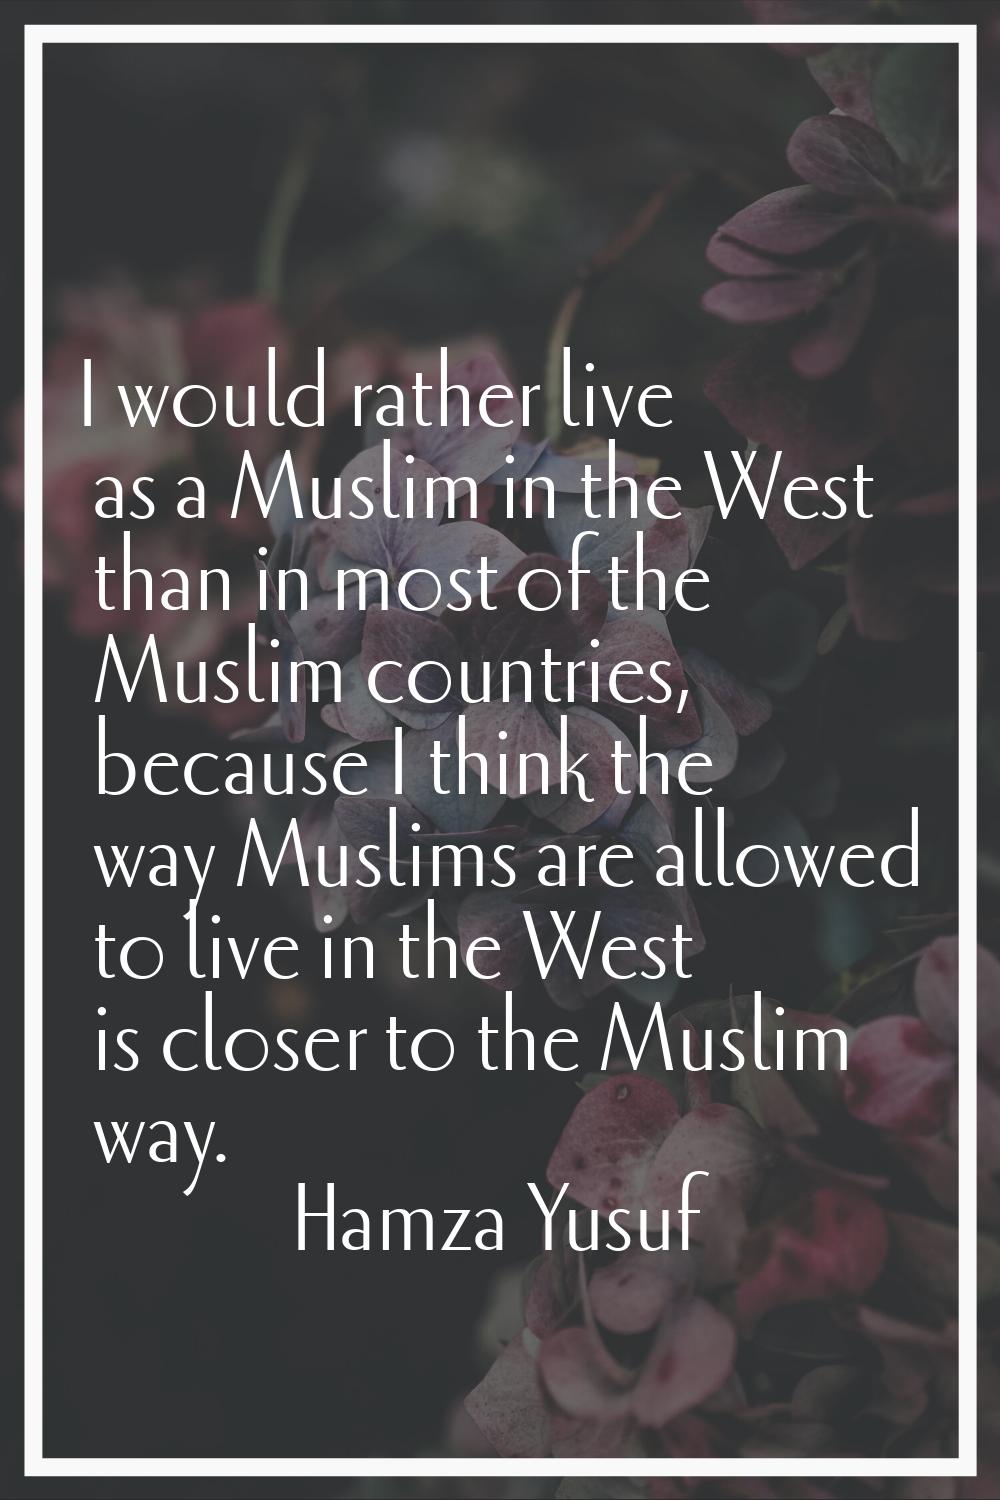 I would rather live as a Muslim in the West than in most of the Muslim countries, because I think t